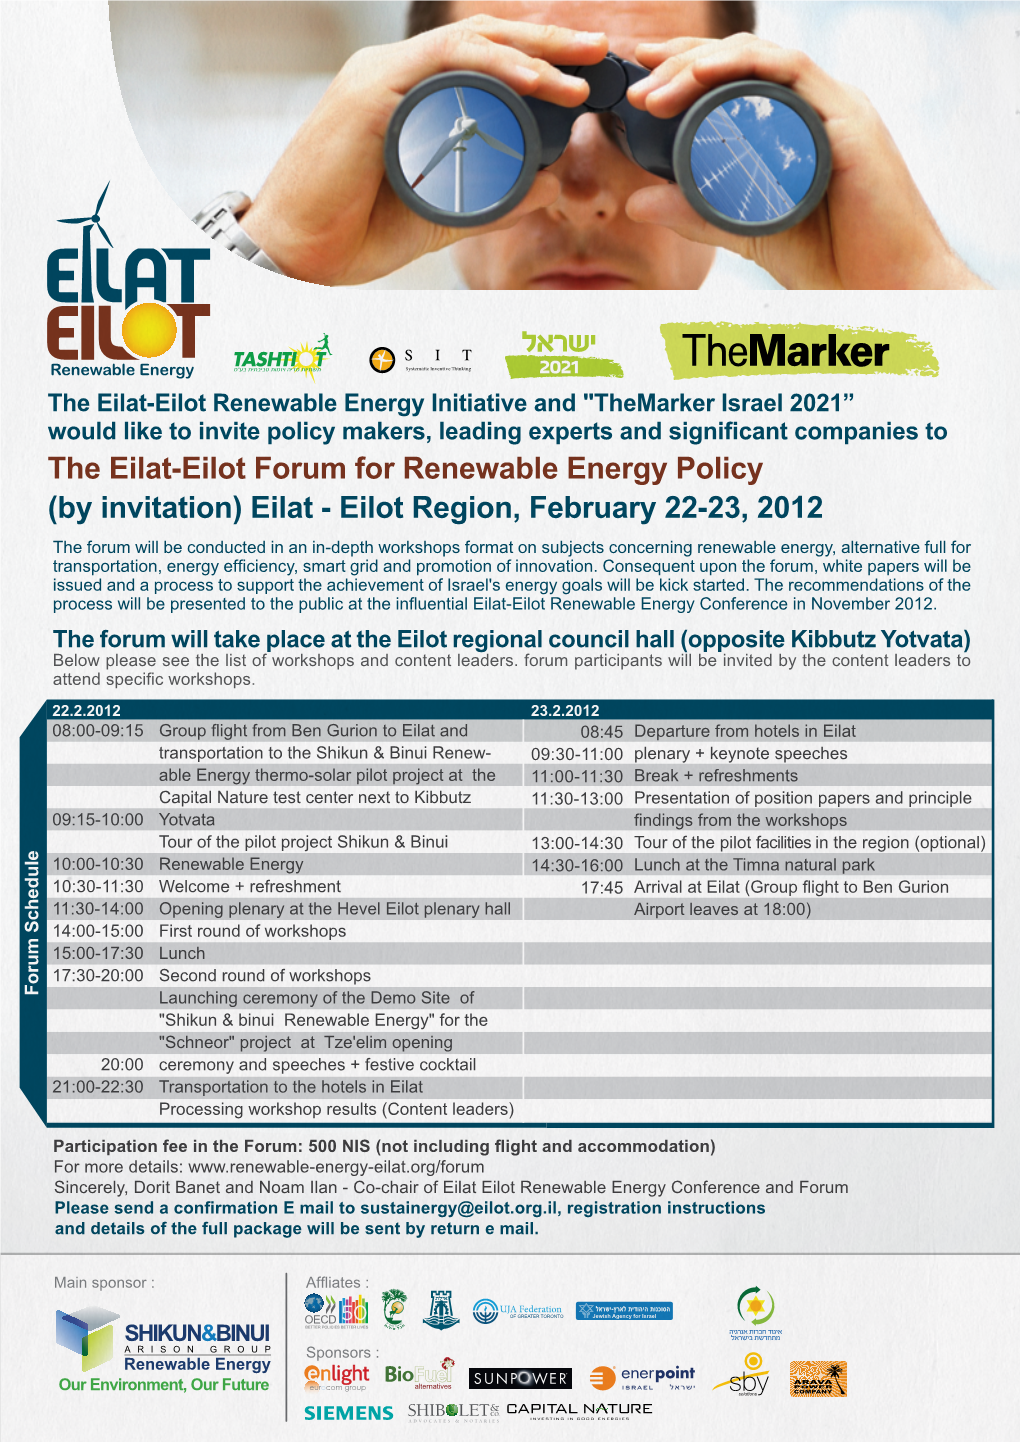 The Eilat-Eilot Forum for Renewable Energy Policy